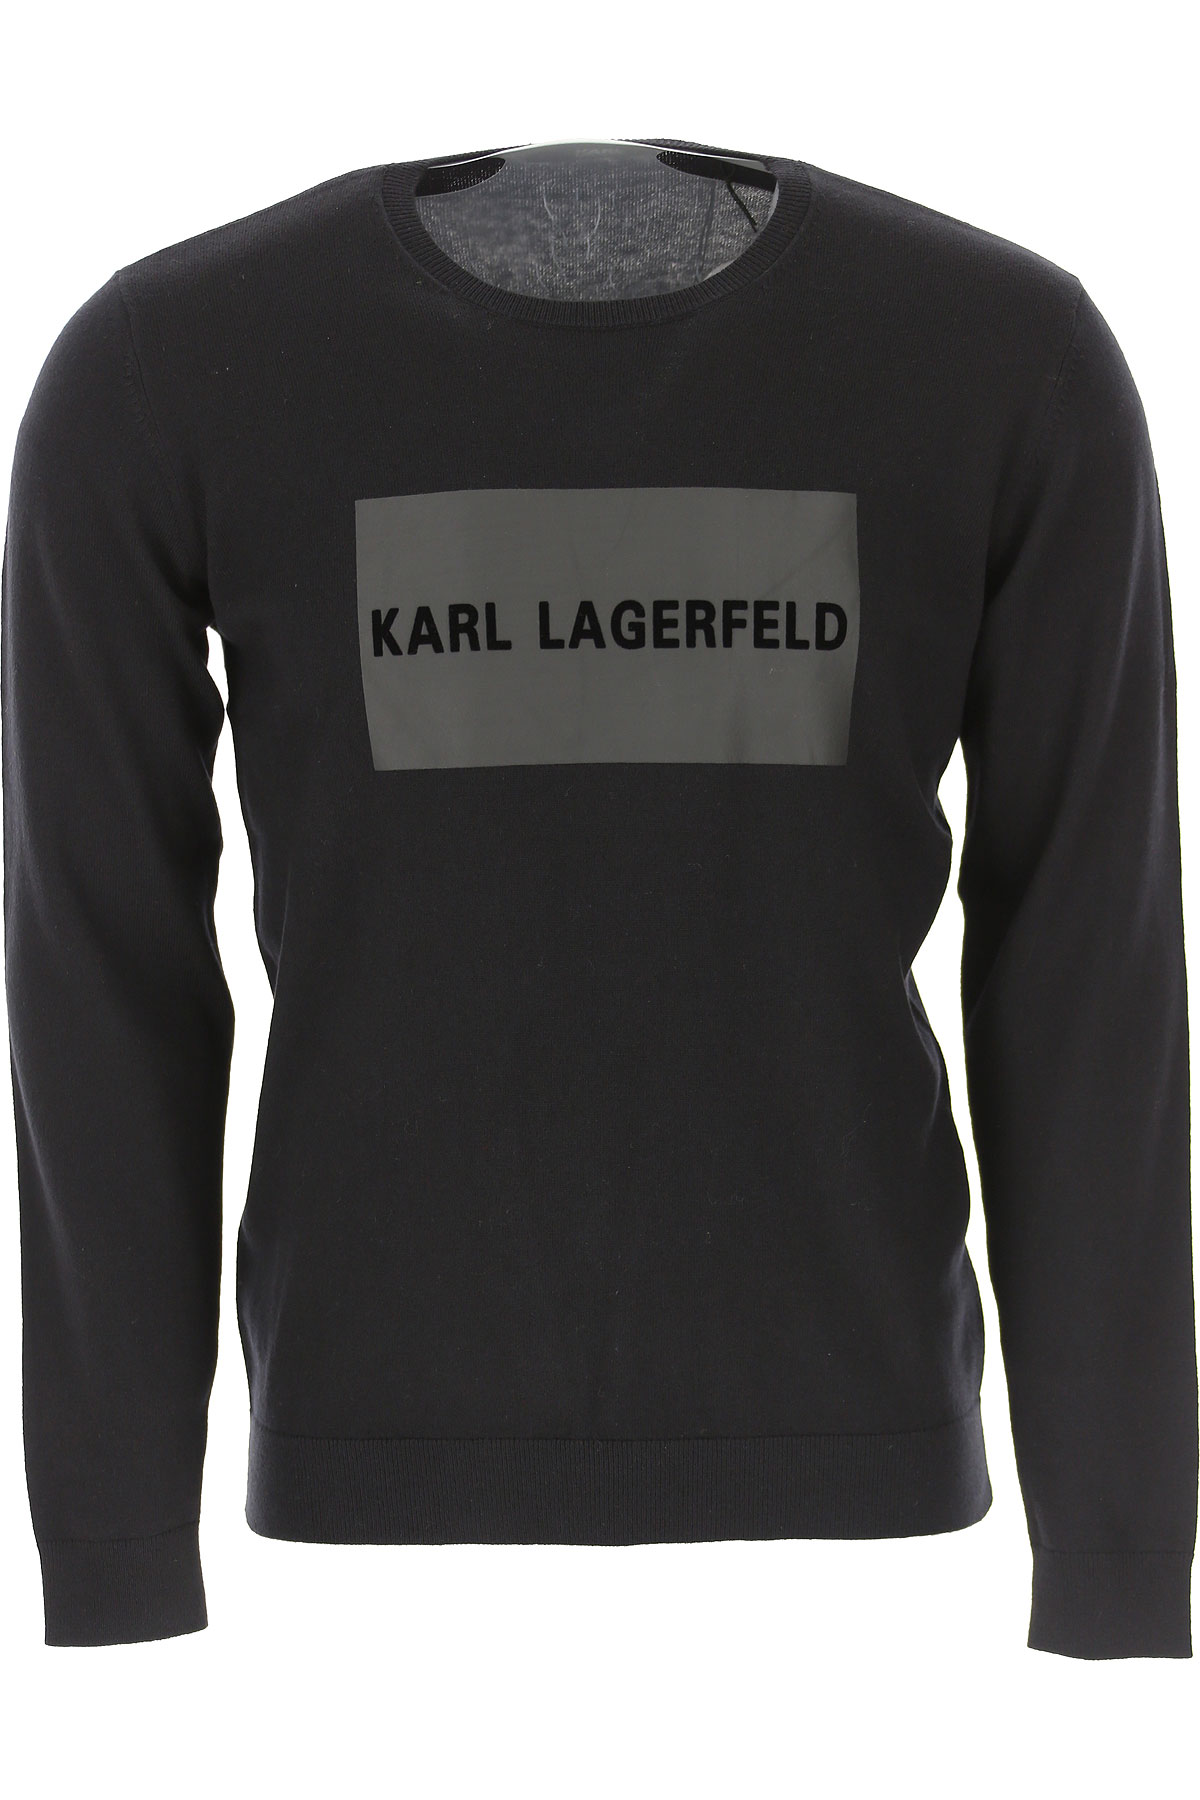 Mens Clothing Karl Lagerfeld, Style code: 655027-592305-990